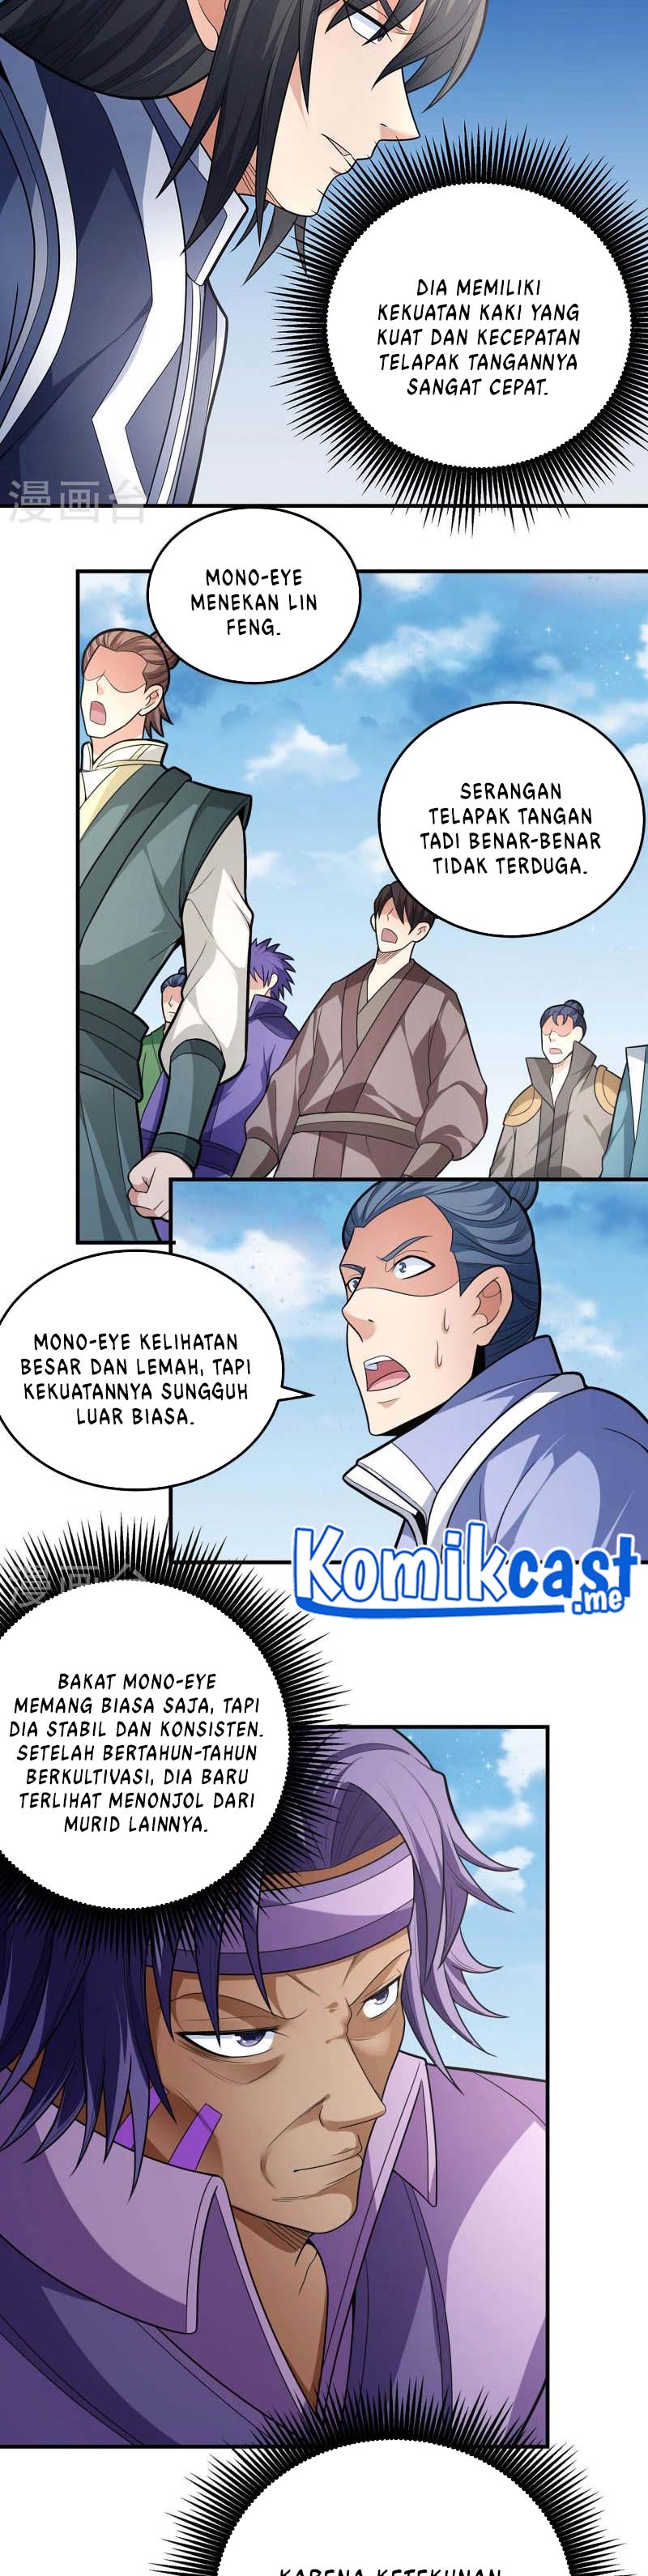 God of Martial Arts Chapter 483